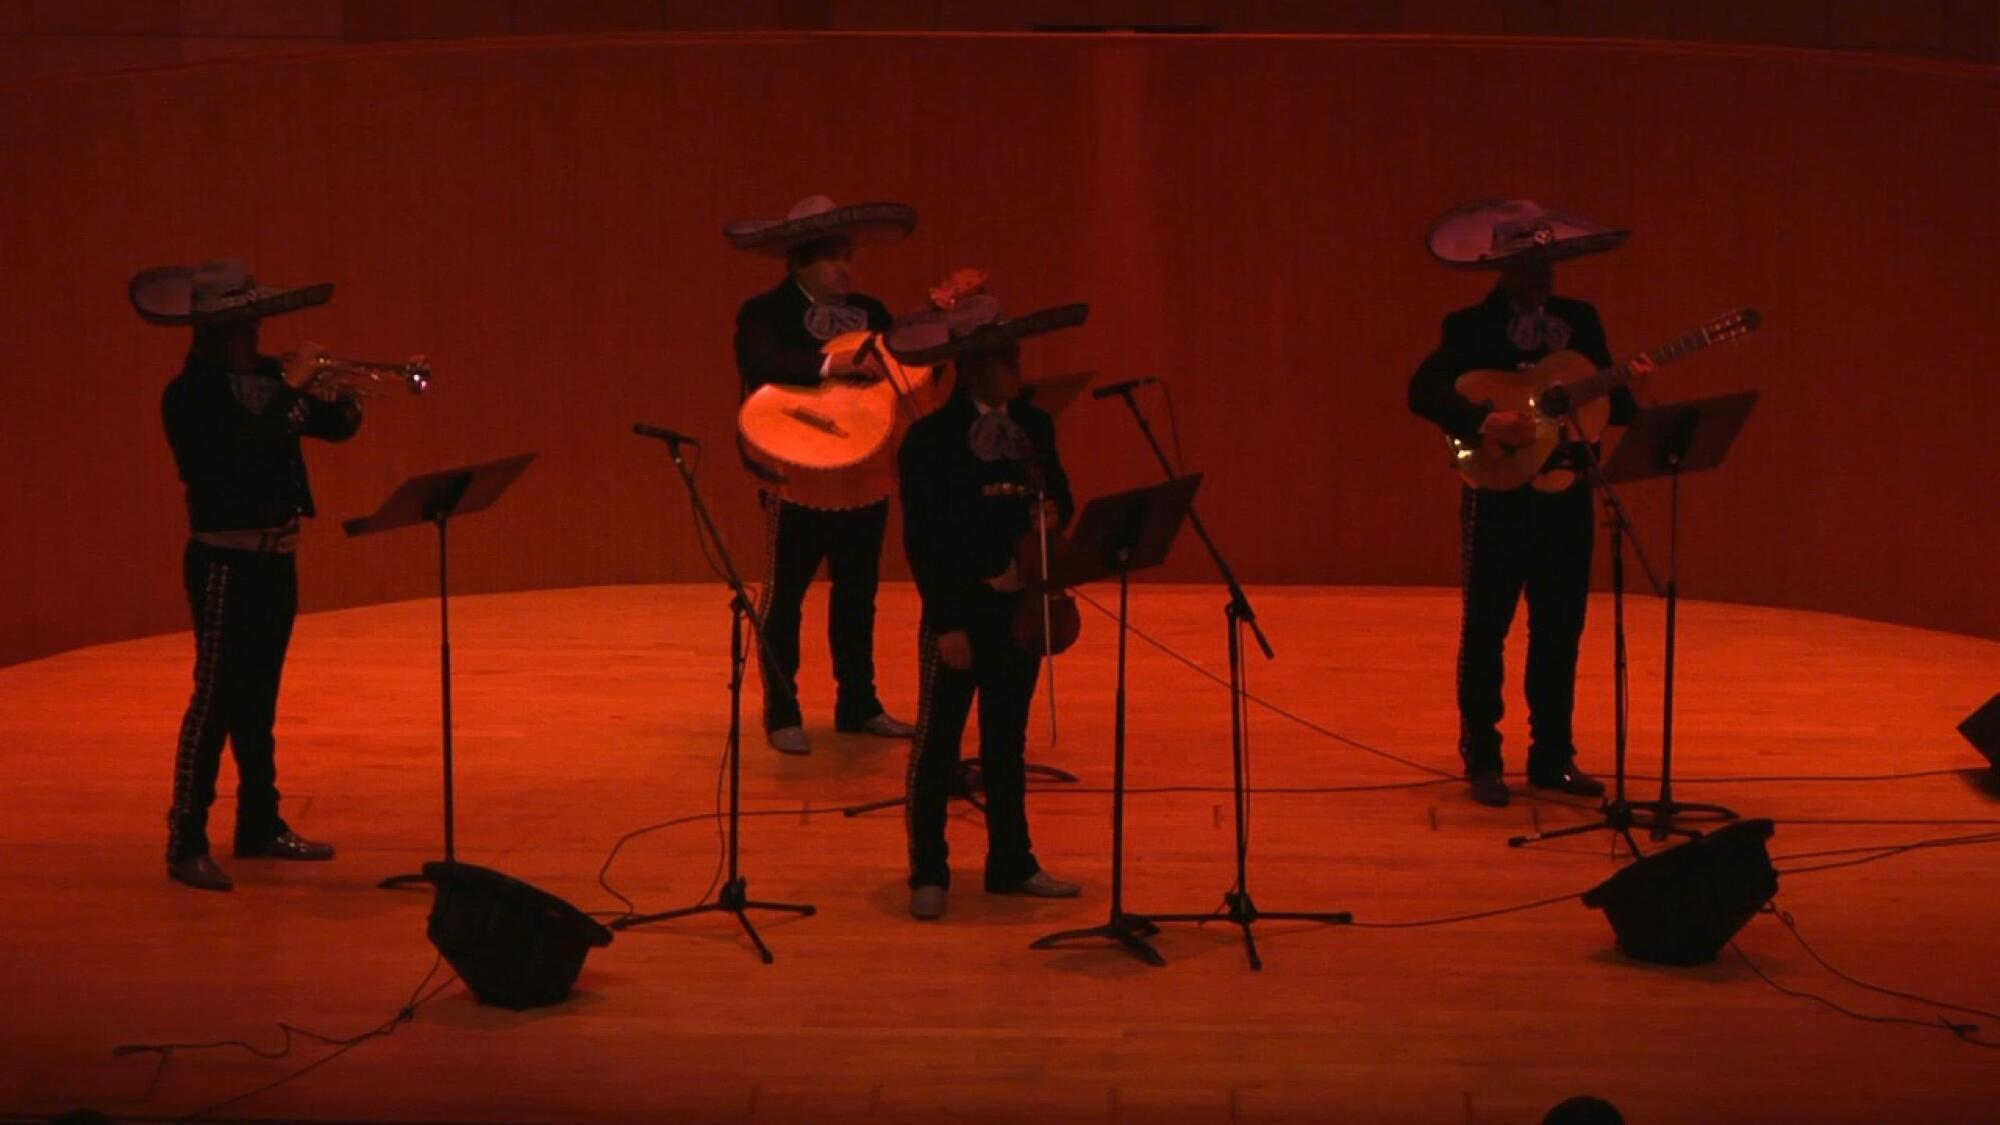 A video still shows the silhouettes of four mariachi musicians on a stage bathed in red light. 